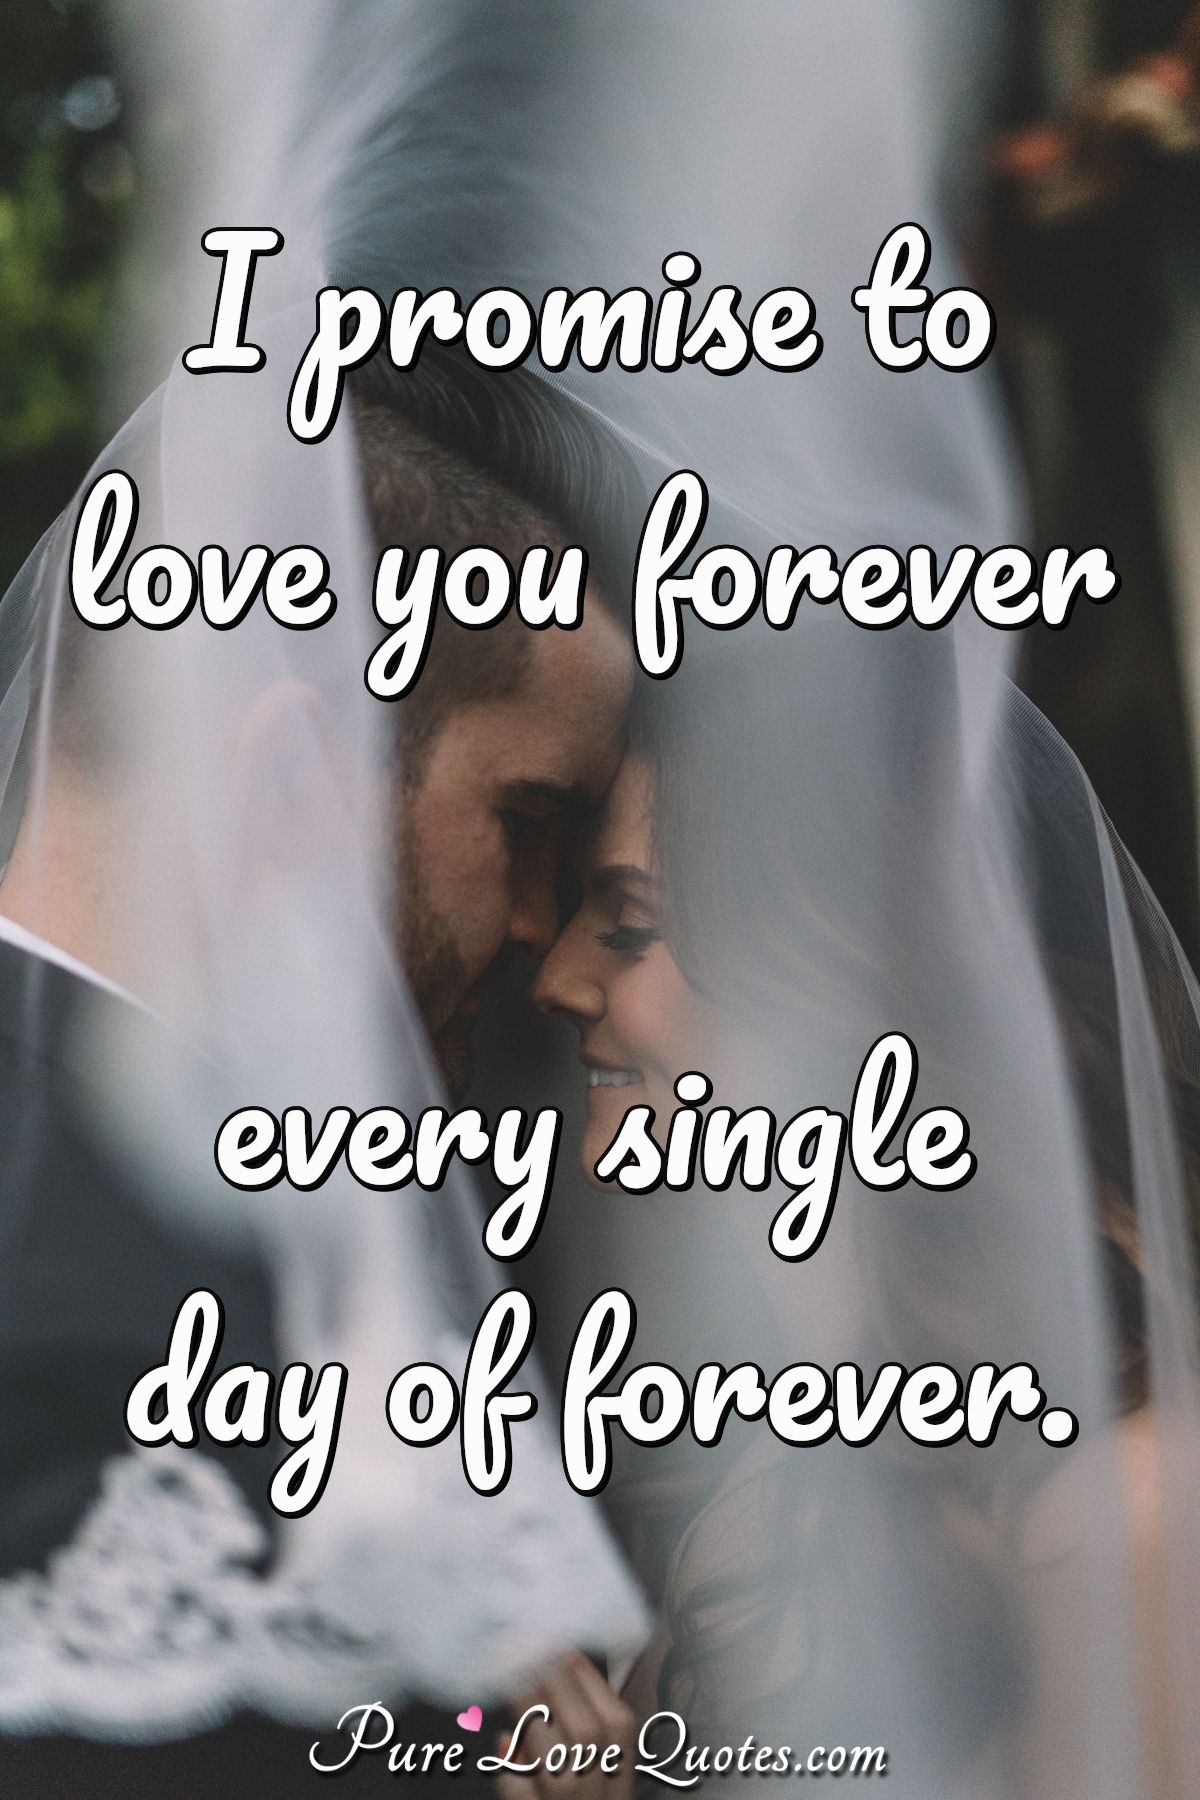 I promise to love you forever every single day of forever. - Anonymous